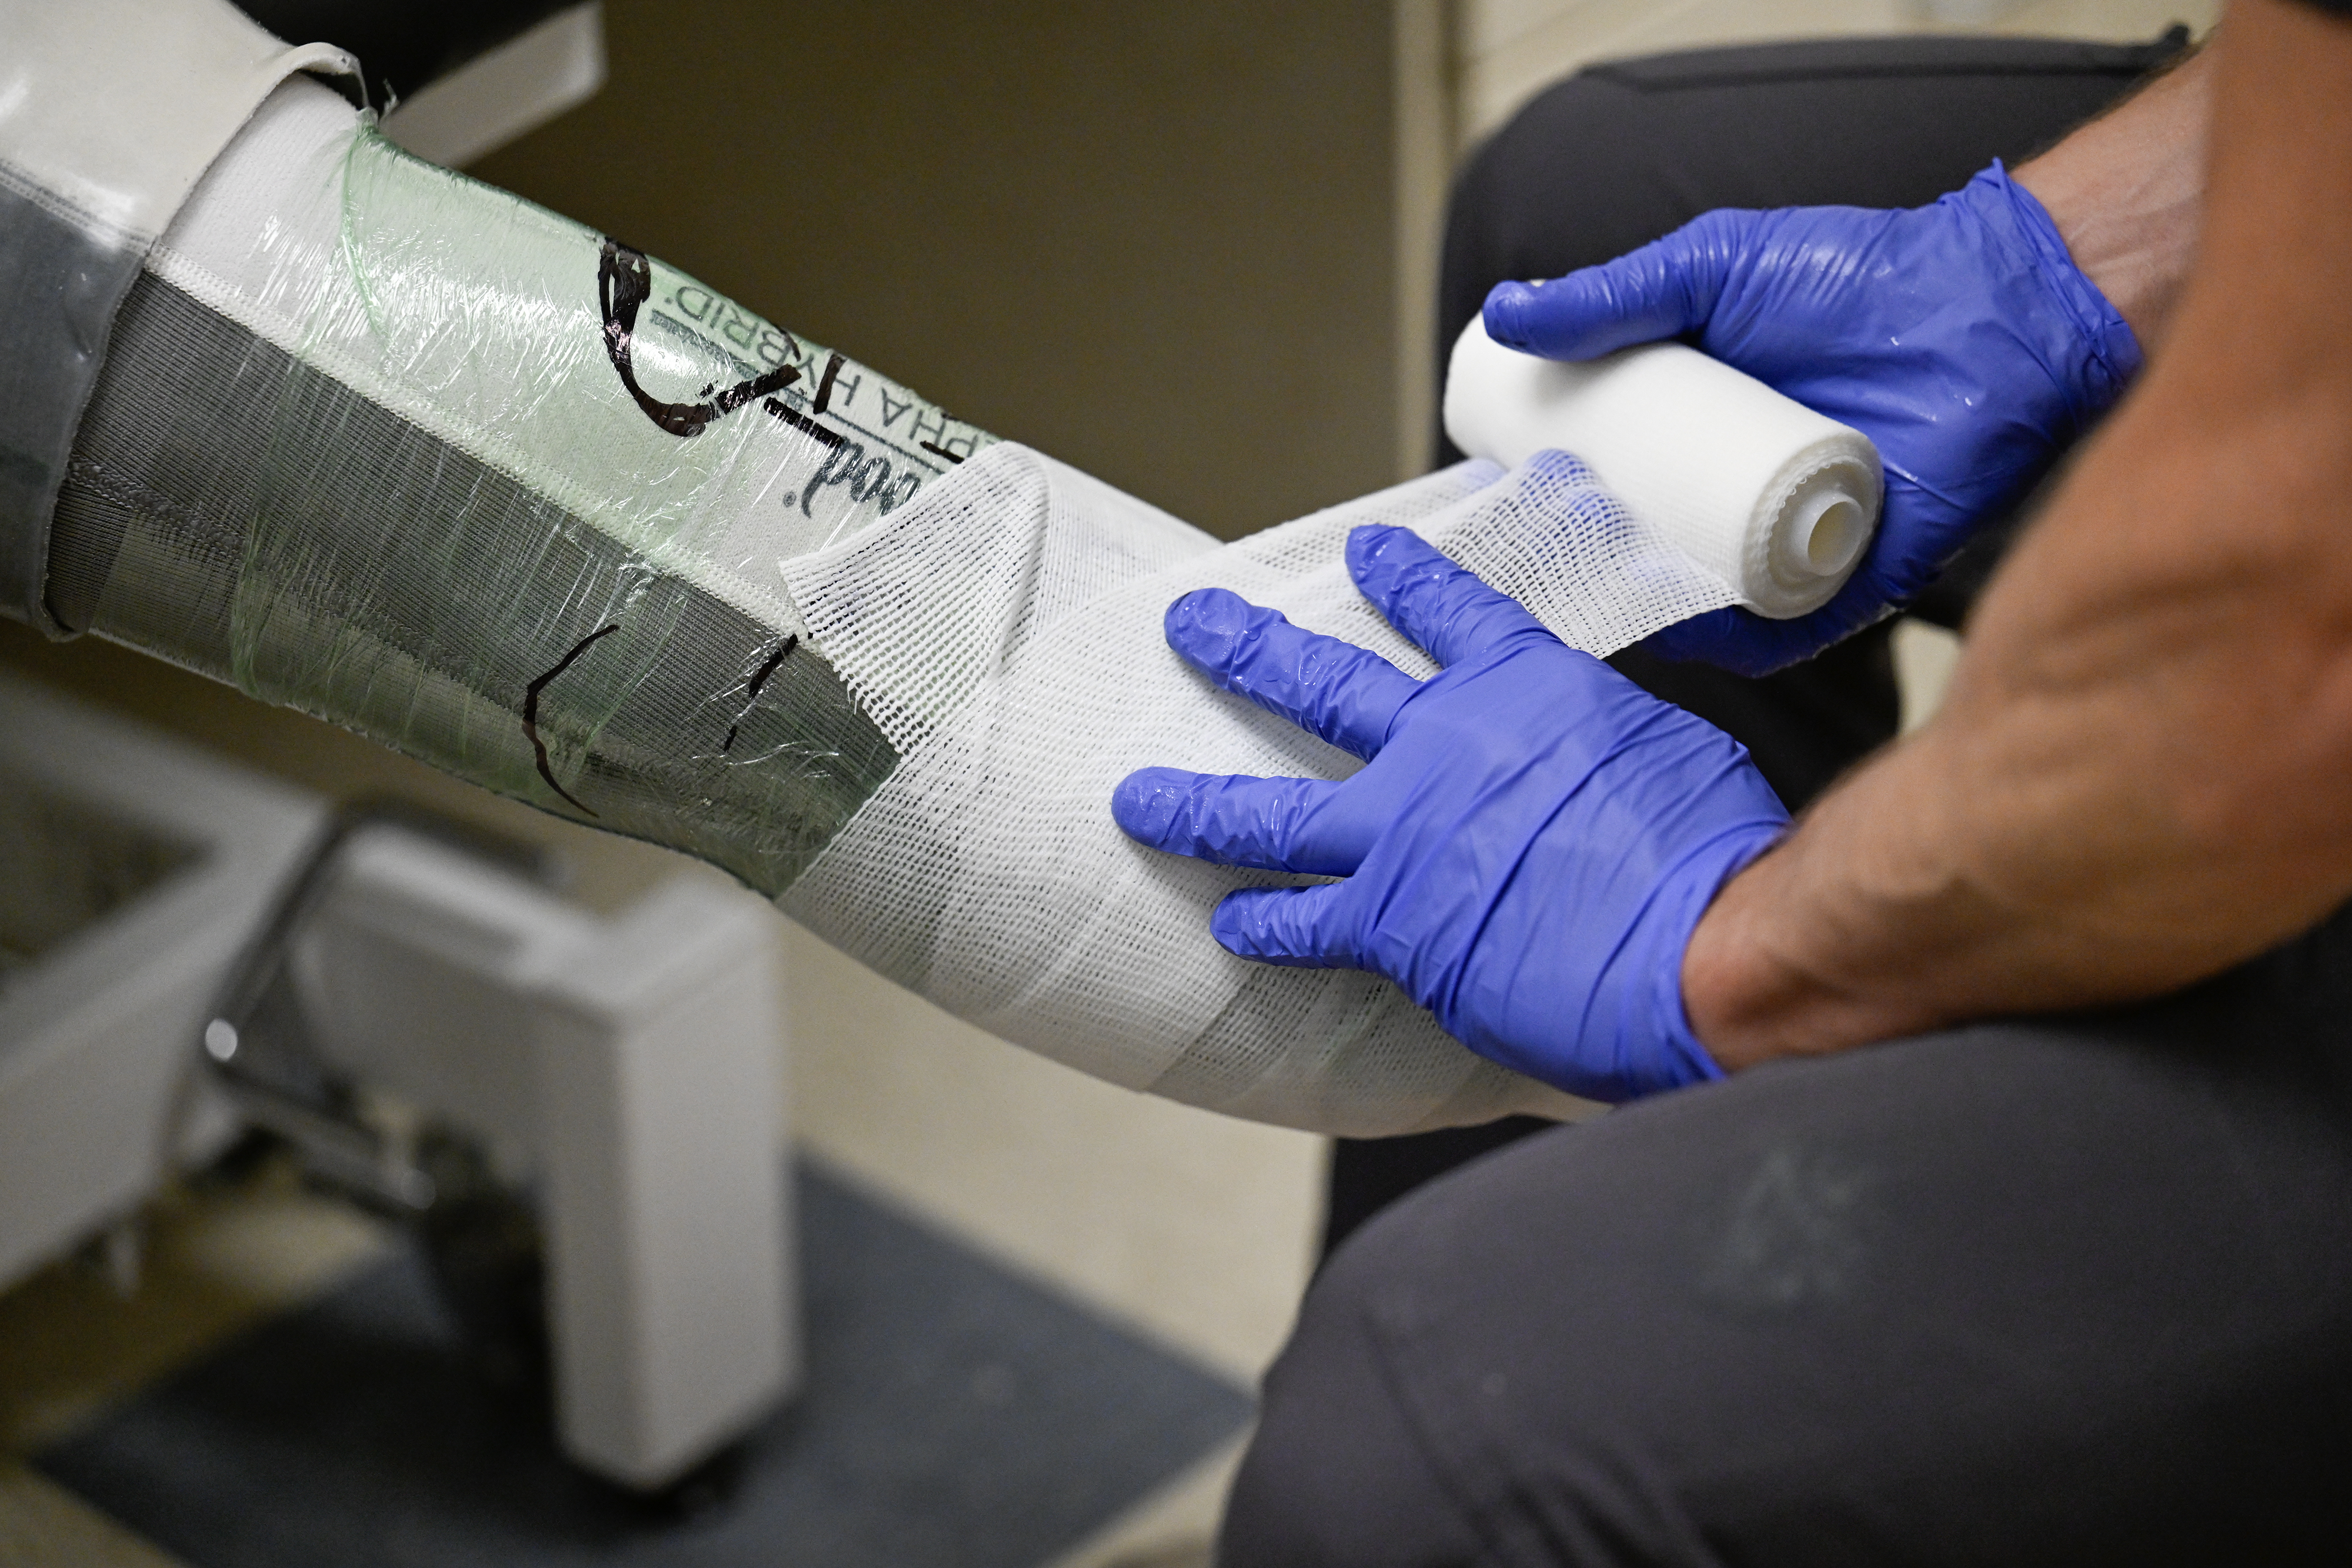 From right: Dan Milius, certified prosthetist, creates a mold of Marty Adams amputation to begin the process of fitting a prosthetic during an appointment in the outpatient pavilion at University of Colorado Anschutz Medical Campus in Aurora. (Matthew Jonas/Staff Photographer)